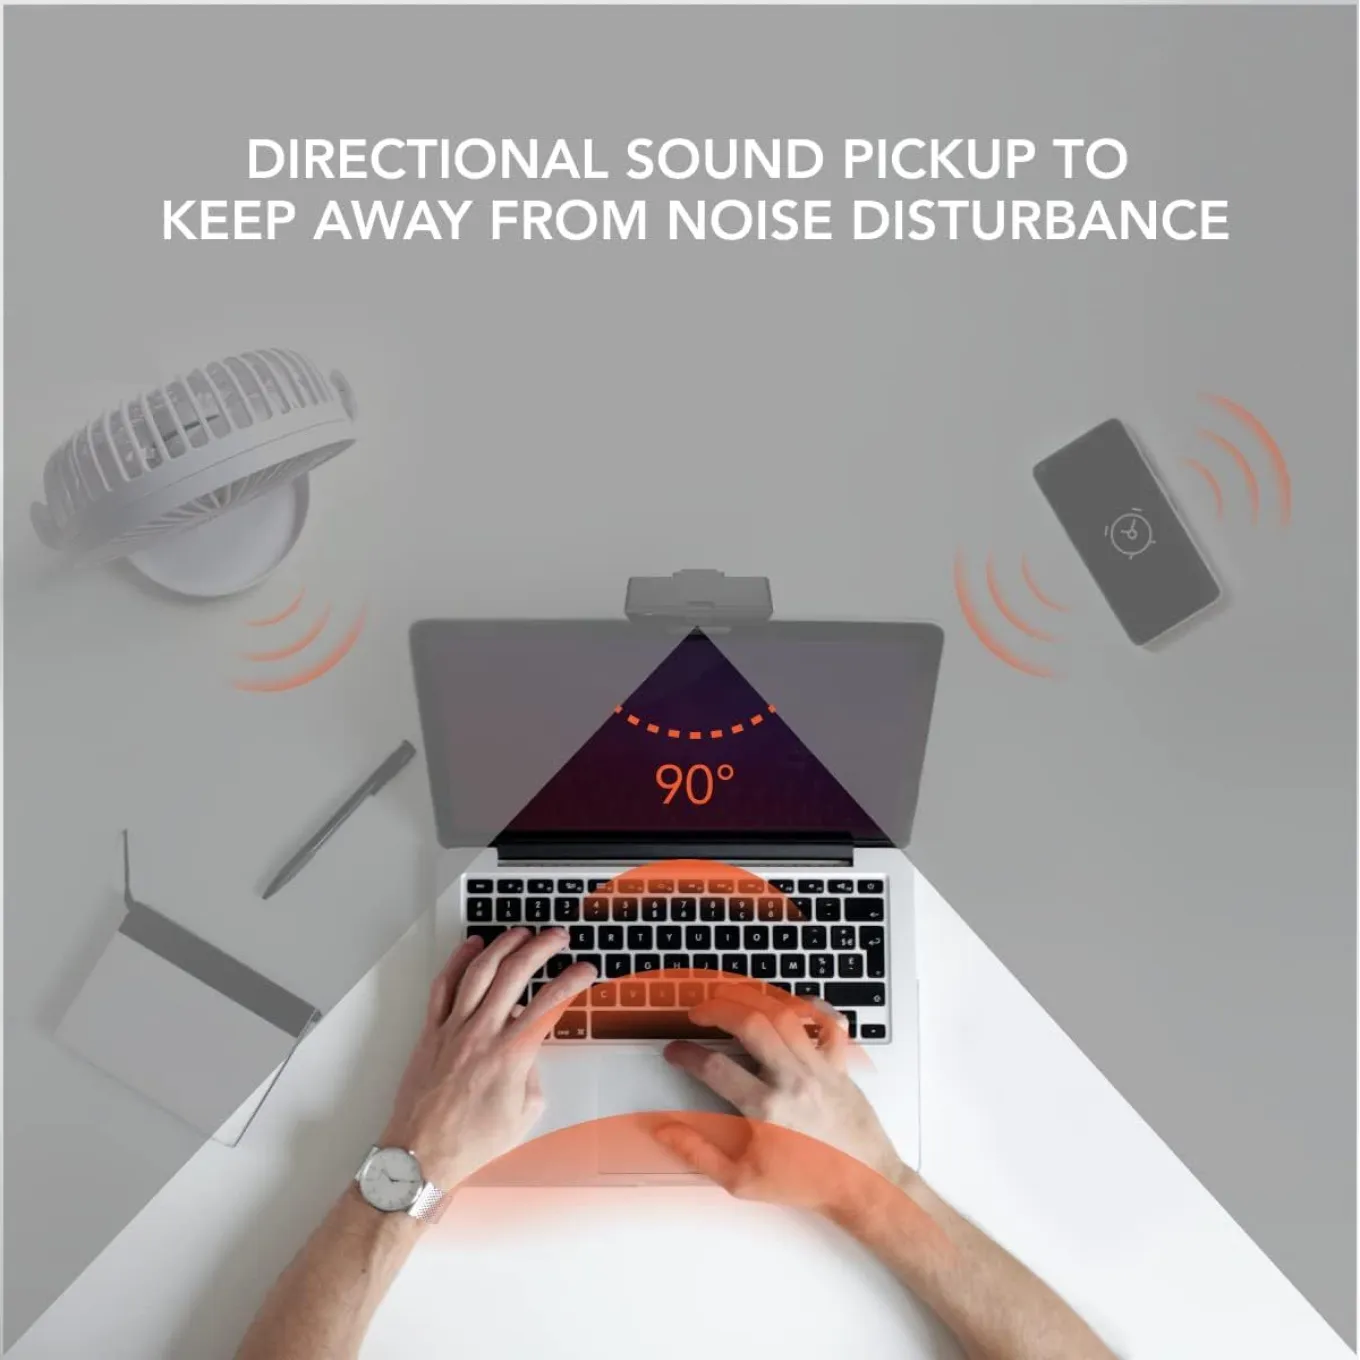 directional sound pickup to keep away from noise disturbance